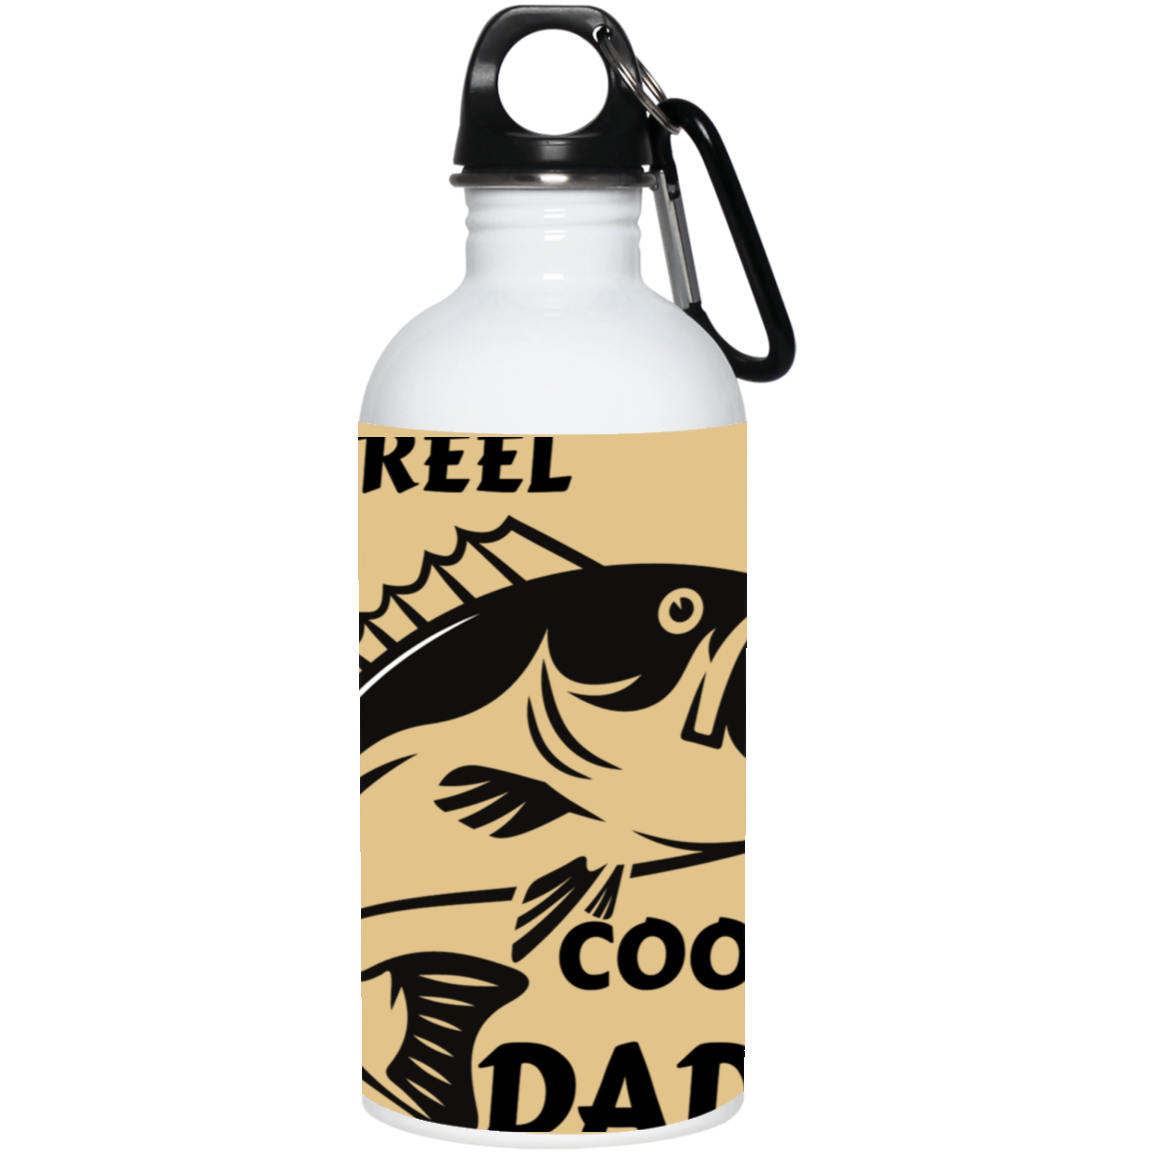 COOL (3) 23663 20 oz. Stainless Steel Water Bottle